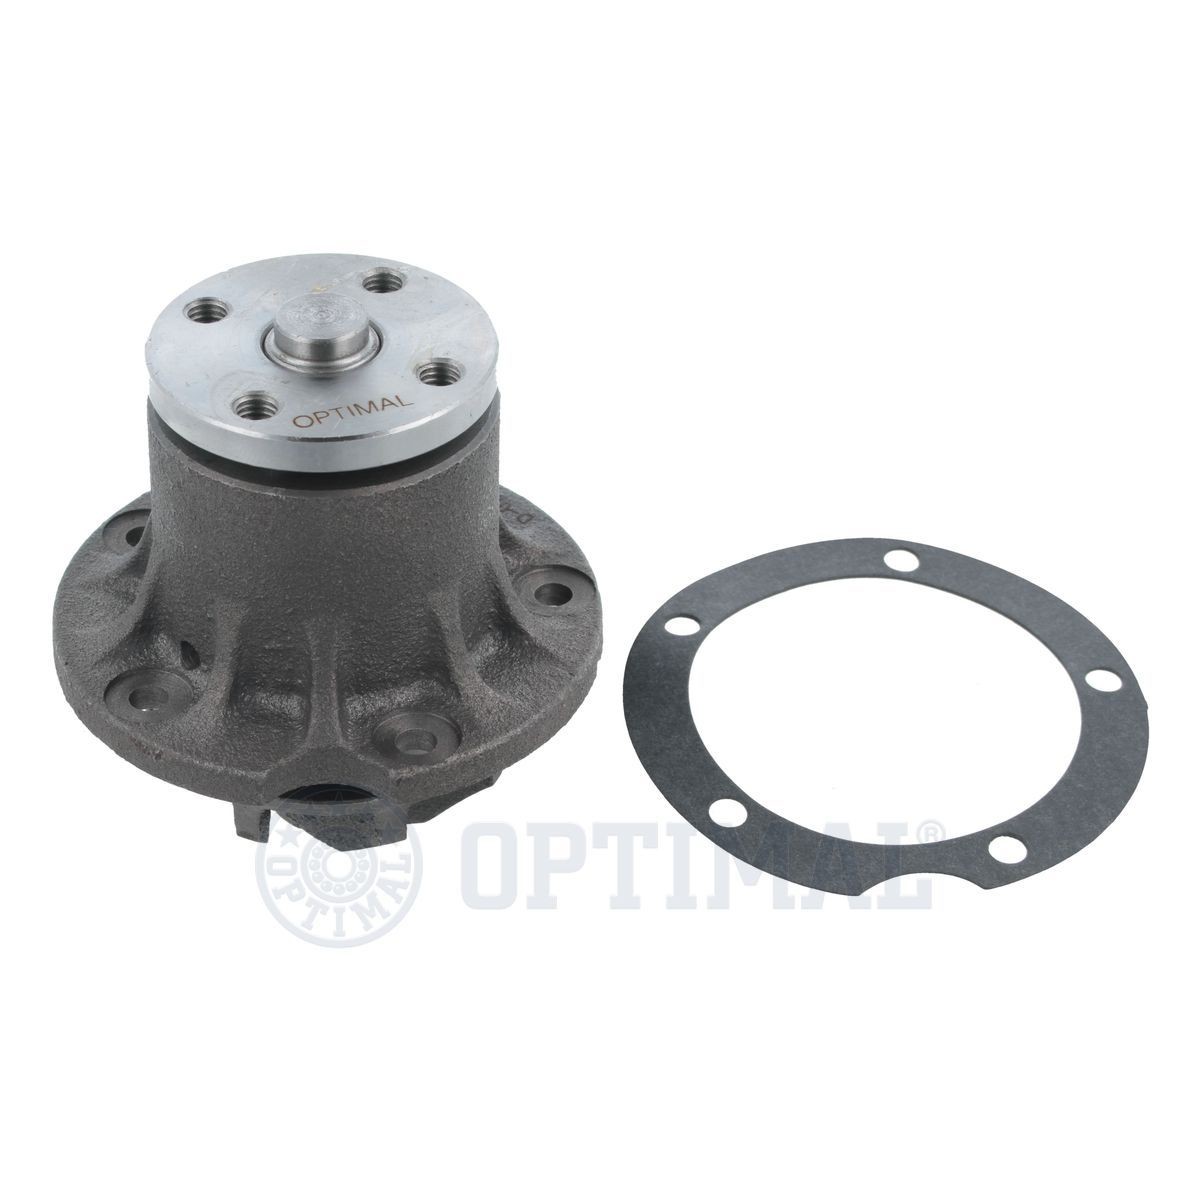 OPTIMAL AQ-1367 Water pump with seal, Mechanical